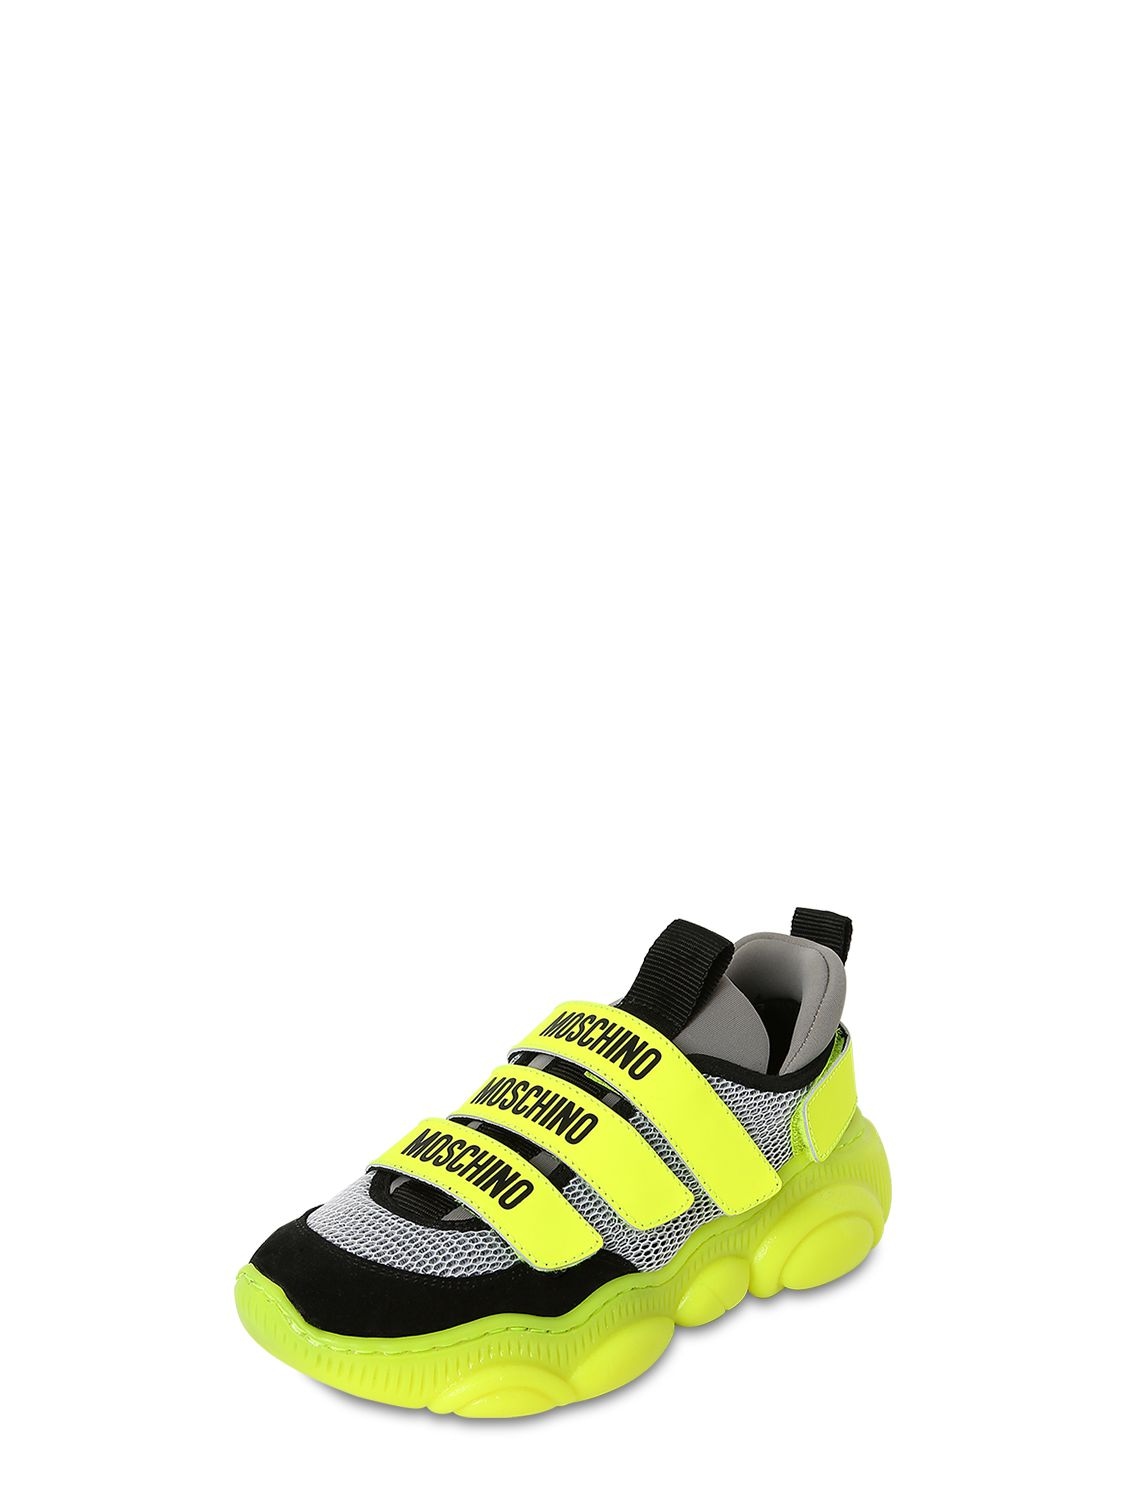 Moschino Kids' Leather & Neoprene Strapped Sneakers In Neon Yellow